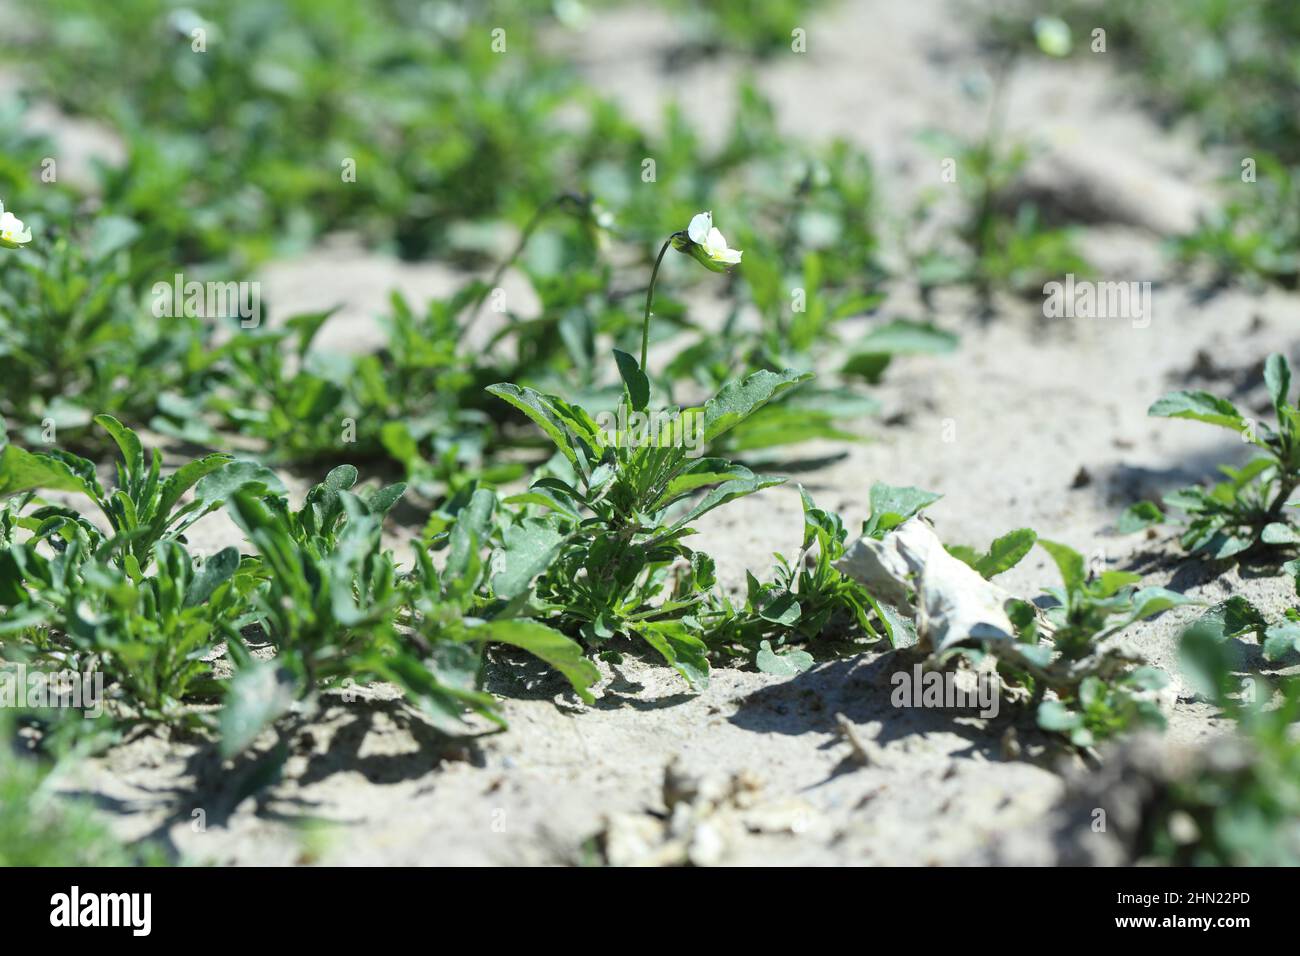 Viola arvensis is a species of violet known by the common name field pansy. Widespread and common weed in agricultural and horticultural crops. Stock Photo